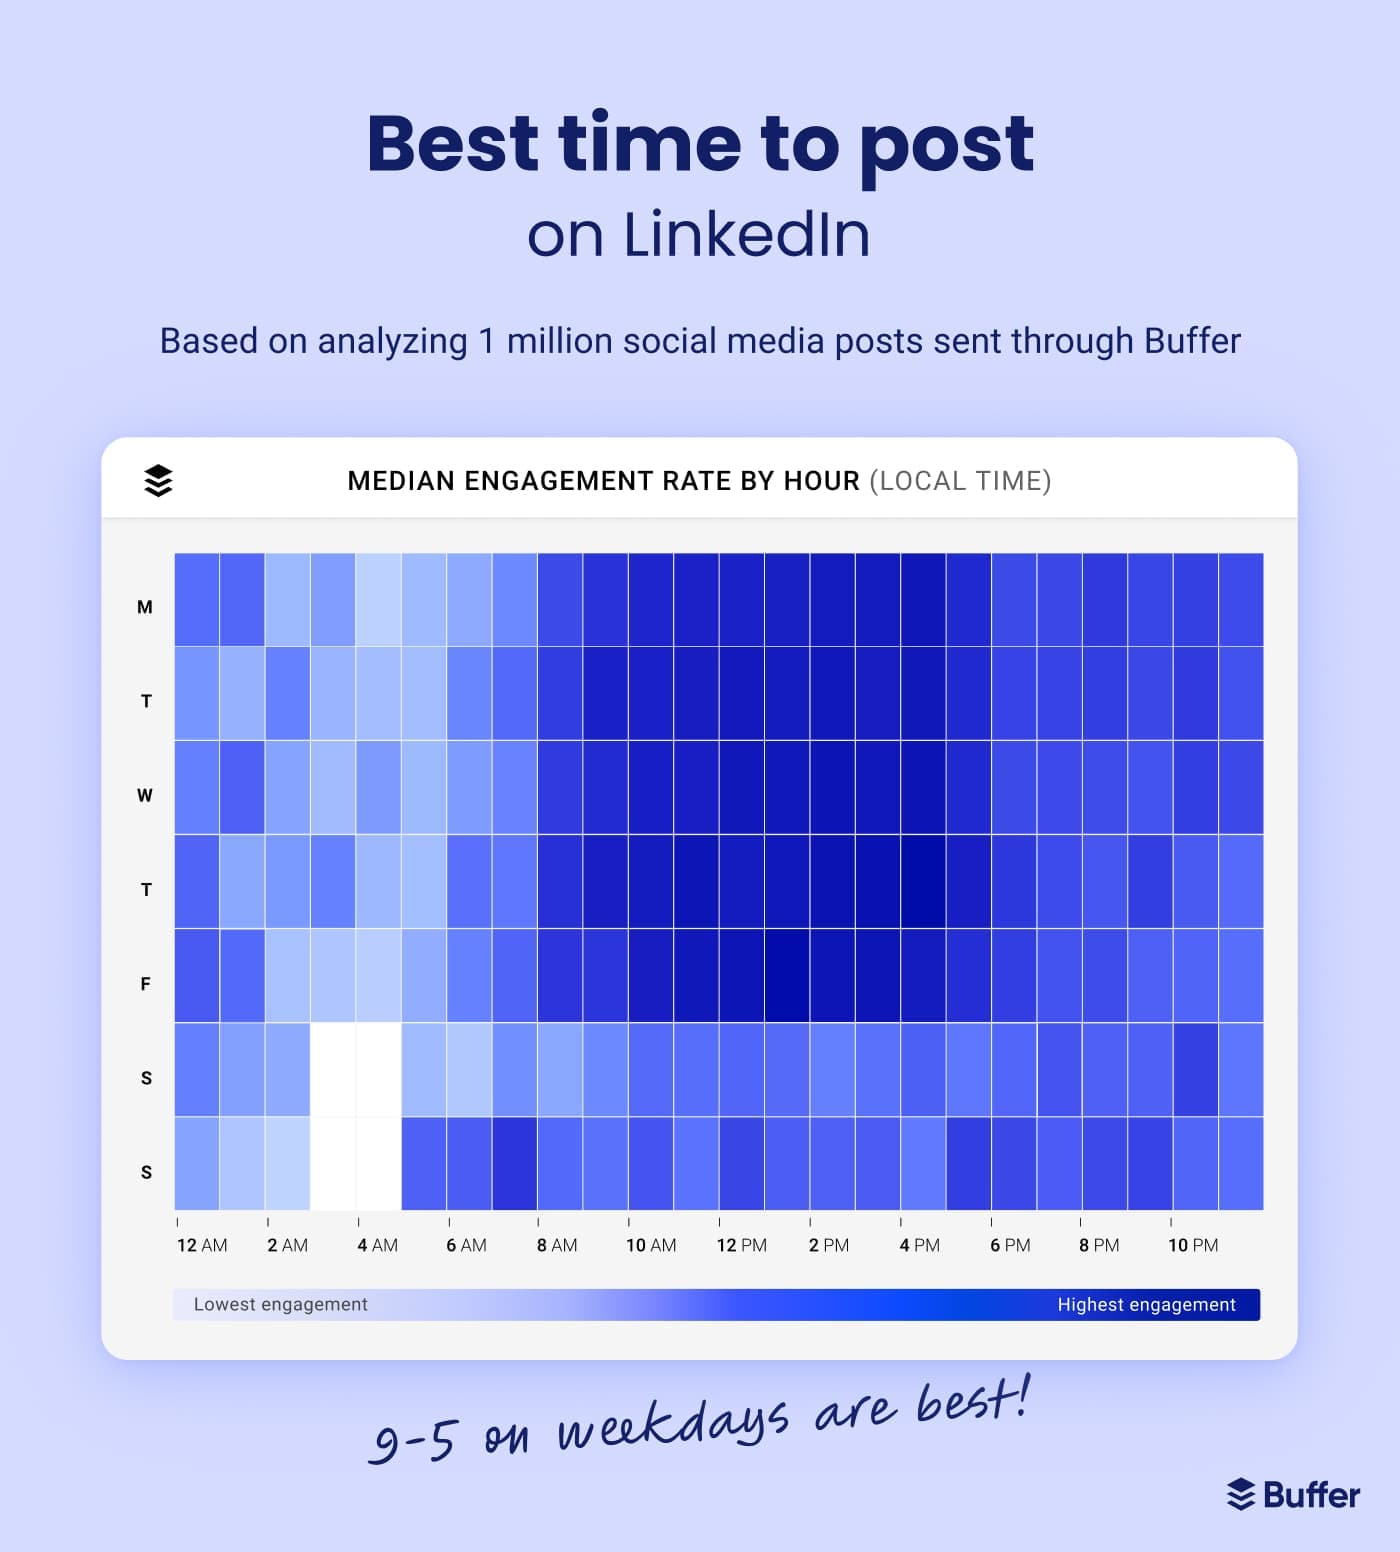 Heatmap charting the best time to post on LinkedIn based on analyzing 1 million social media posts sent through Buffer. 9am to 5pm on weekdays best.